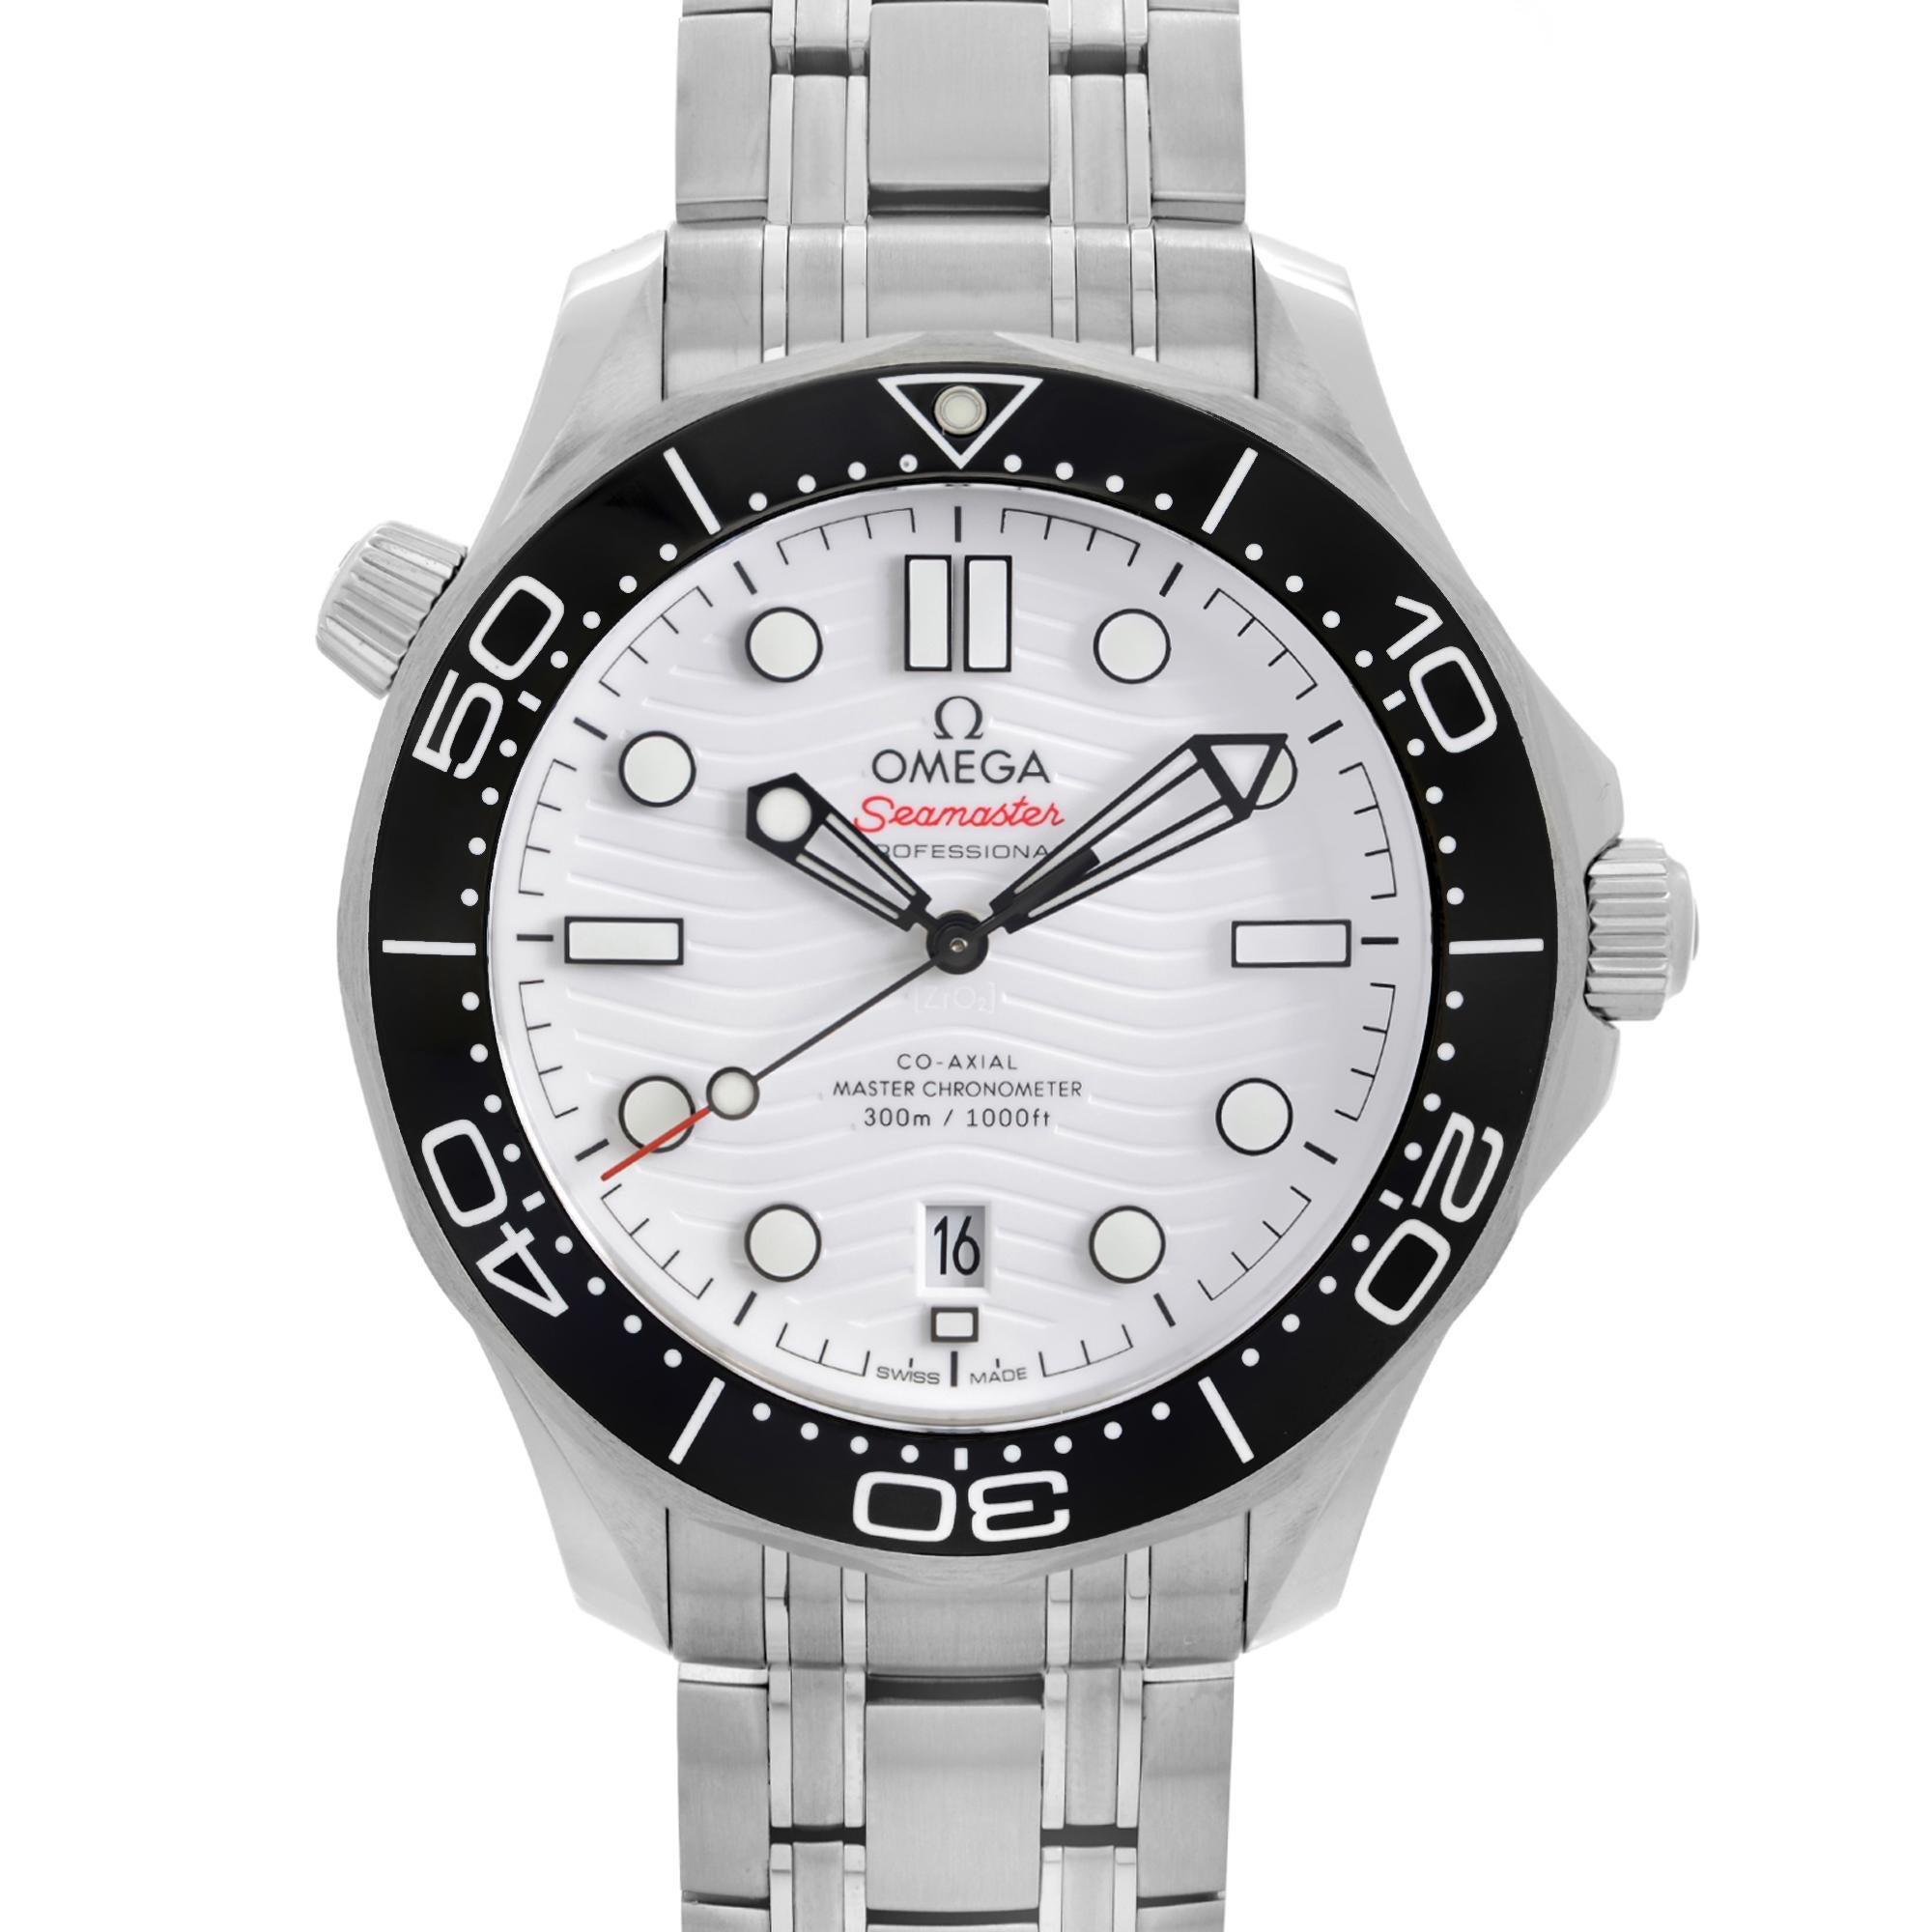 Display Model Omega Seamaster Diver 300m 42mm Stainless Steel White Dial Automatic Men's Watch 210.32.42.20.04.001. This Beautiful Timepiece Is Powered by a Mechanical (Automatic) Movement and Features: Round Stainless Steel Case with a Stainless